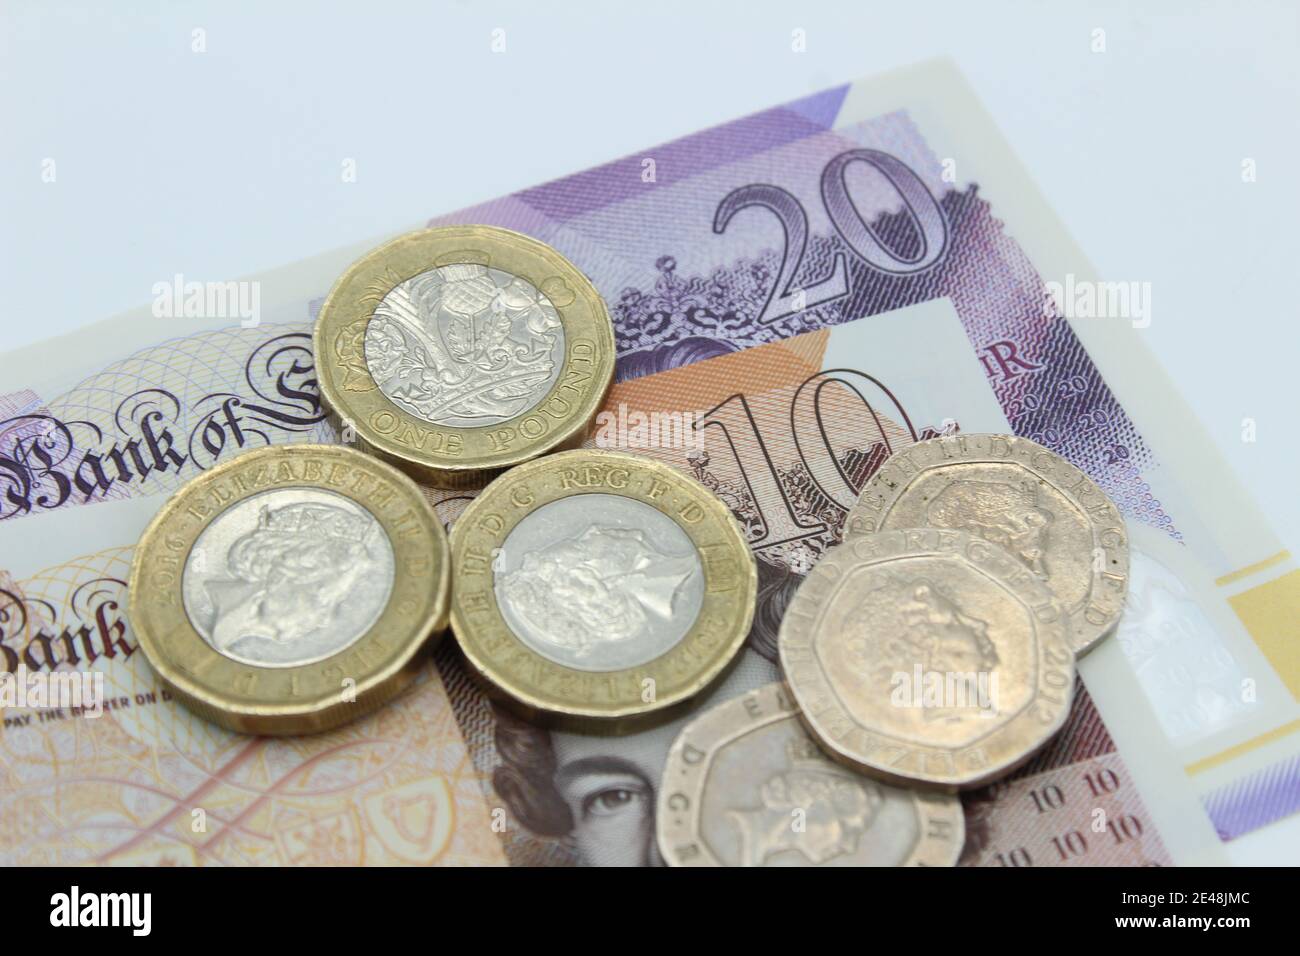 British currency sterling ten and twenty pound notes and coins on plain background Stock Photo